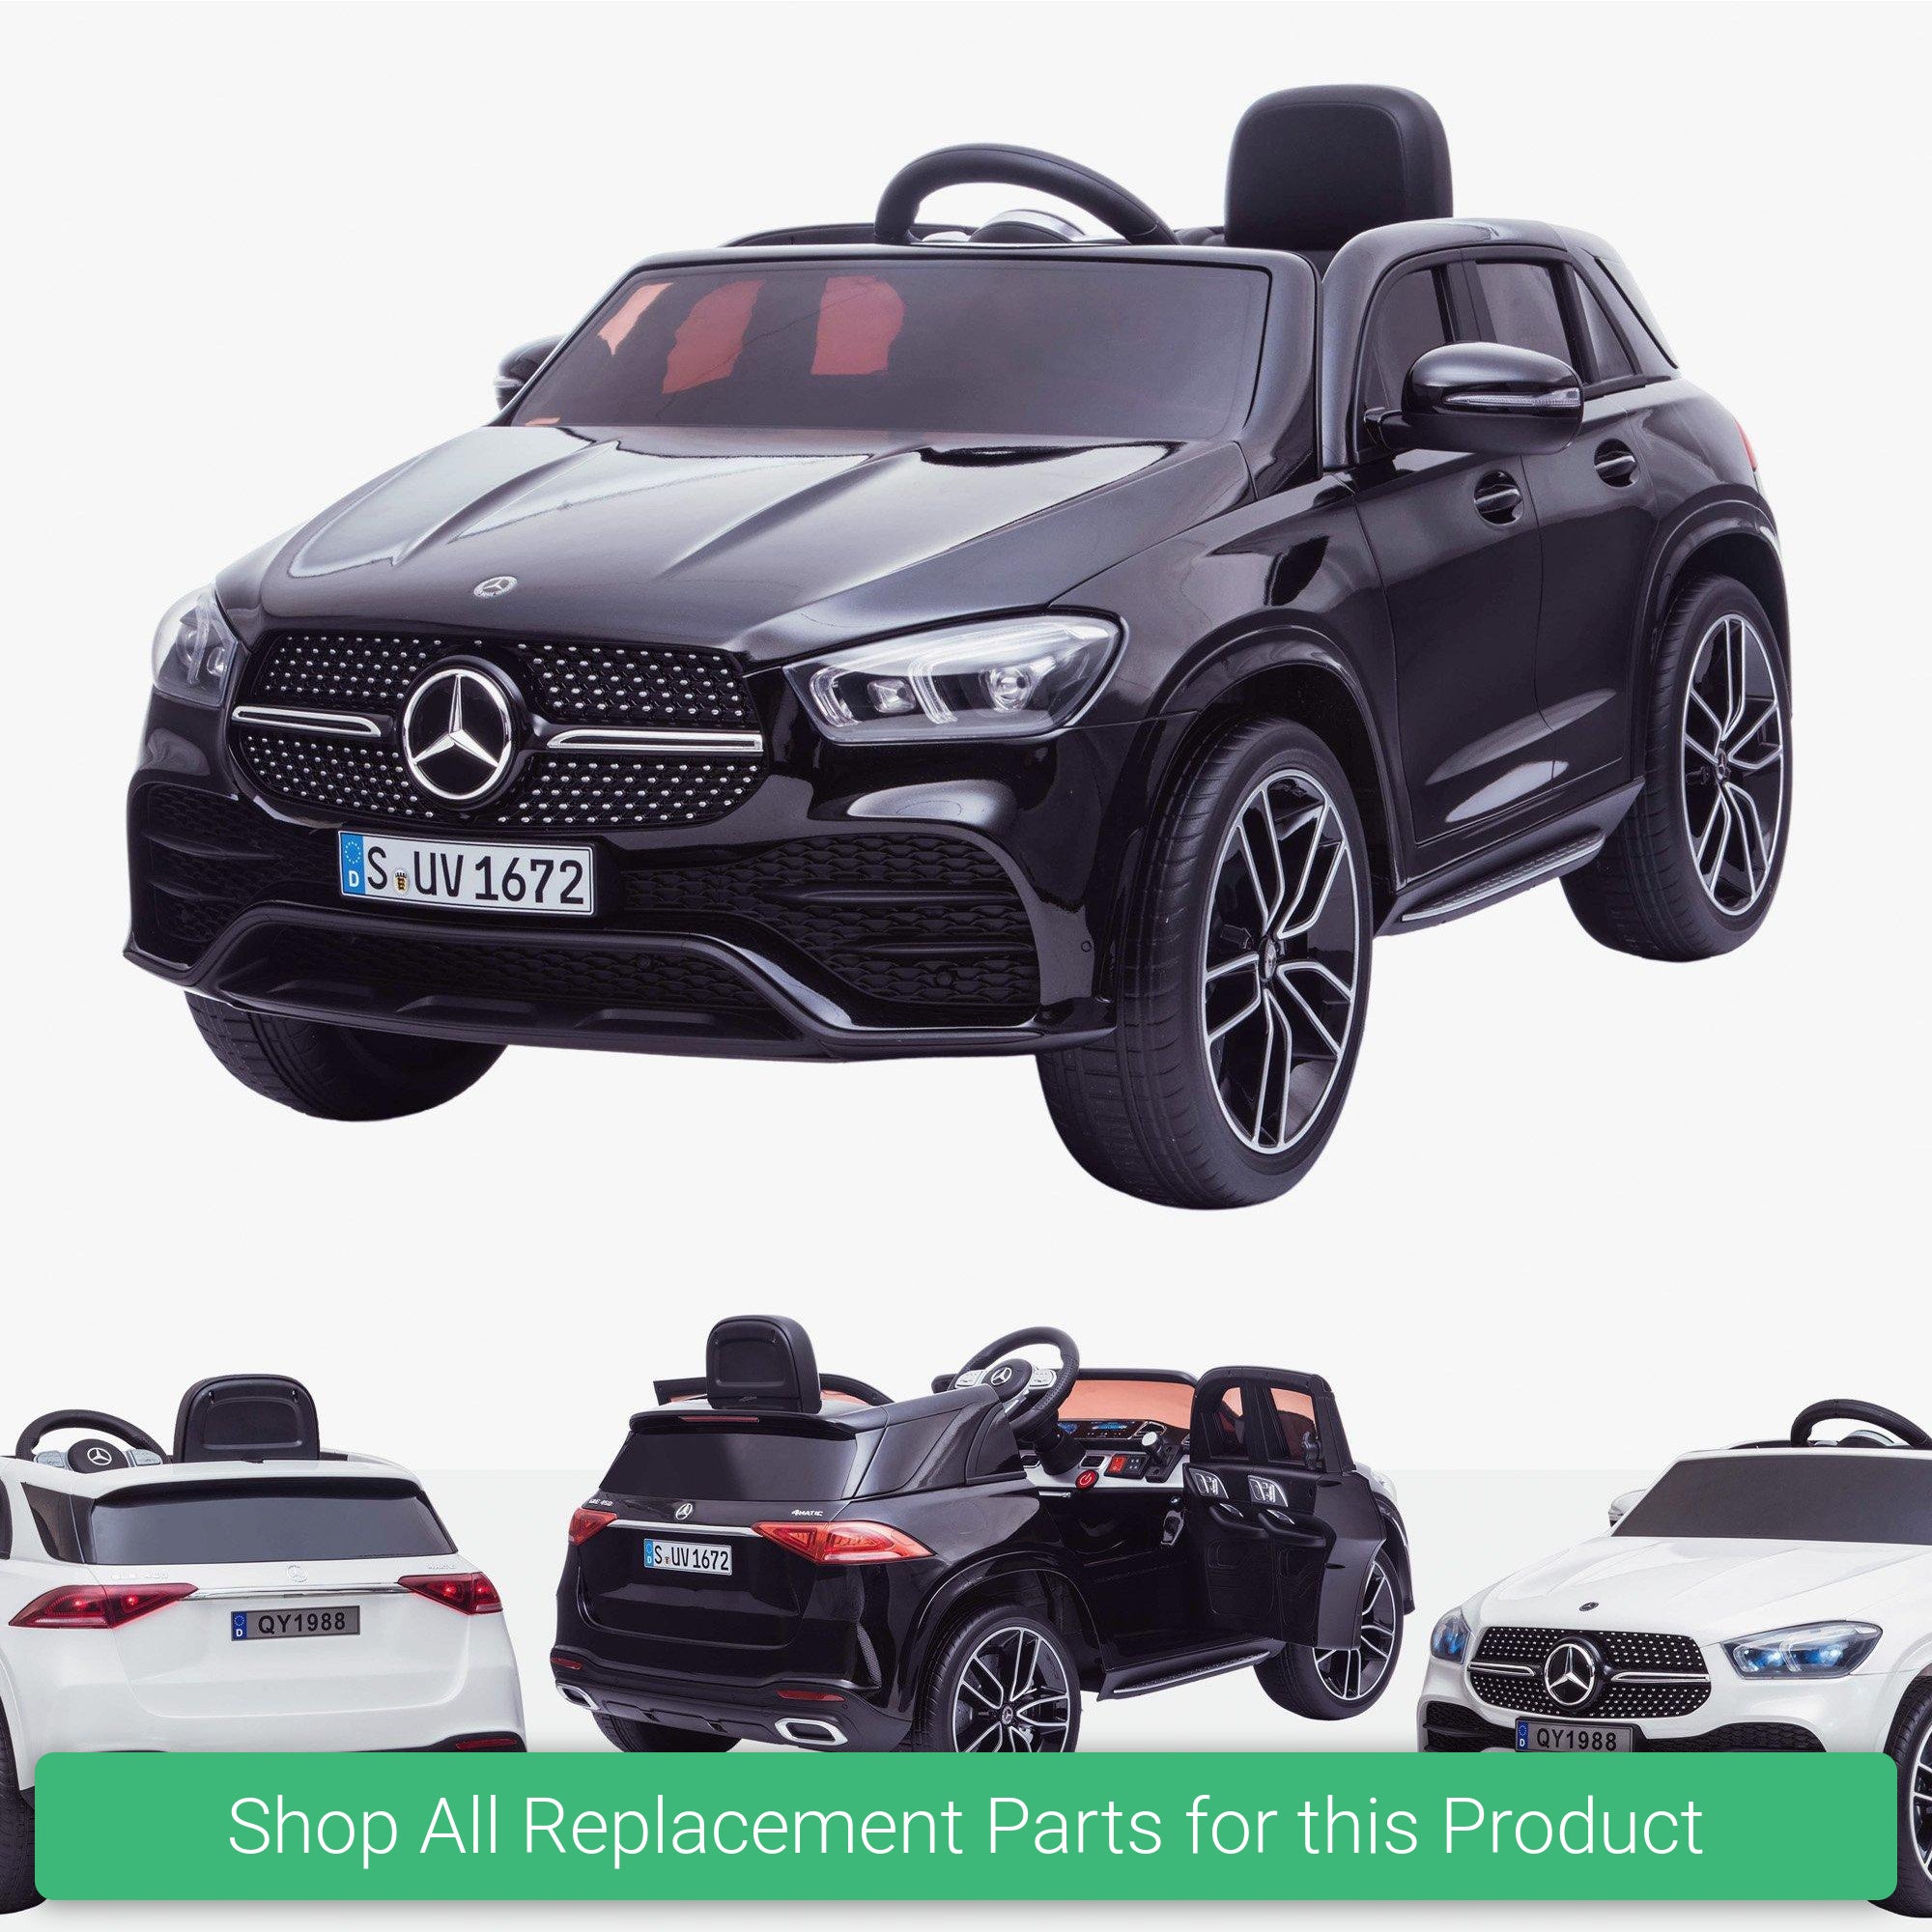 Replacement Parts and Spares for Kids Mercedes AMG GLE450 - GLE-450-VARI - QY1988 GLE450